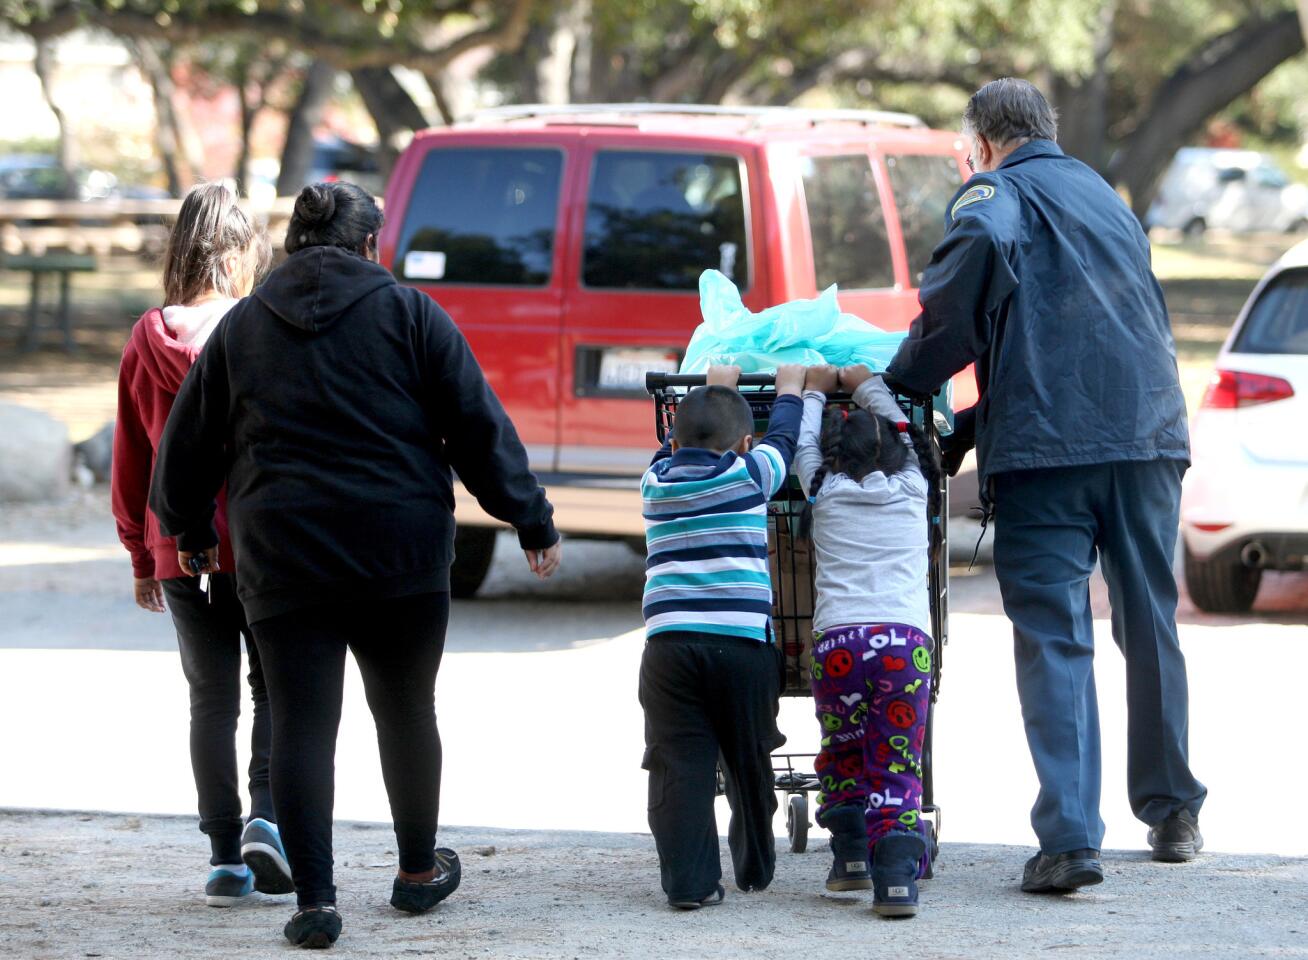 Los Angeles County Sheriff's Crescenta Valley Station volunteer Paul Graettinger, right, helps the Parra family to their car with a cart of groceries and toys during the Crescenta Valley Sheriff Station's annual Toy and Food Drive at Crescenta Valley Park in La Crescenta on Saturday, Dec. 19, 2015. Evelyn, 5, and Eliu, 4, help push the heavy cart.